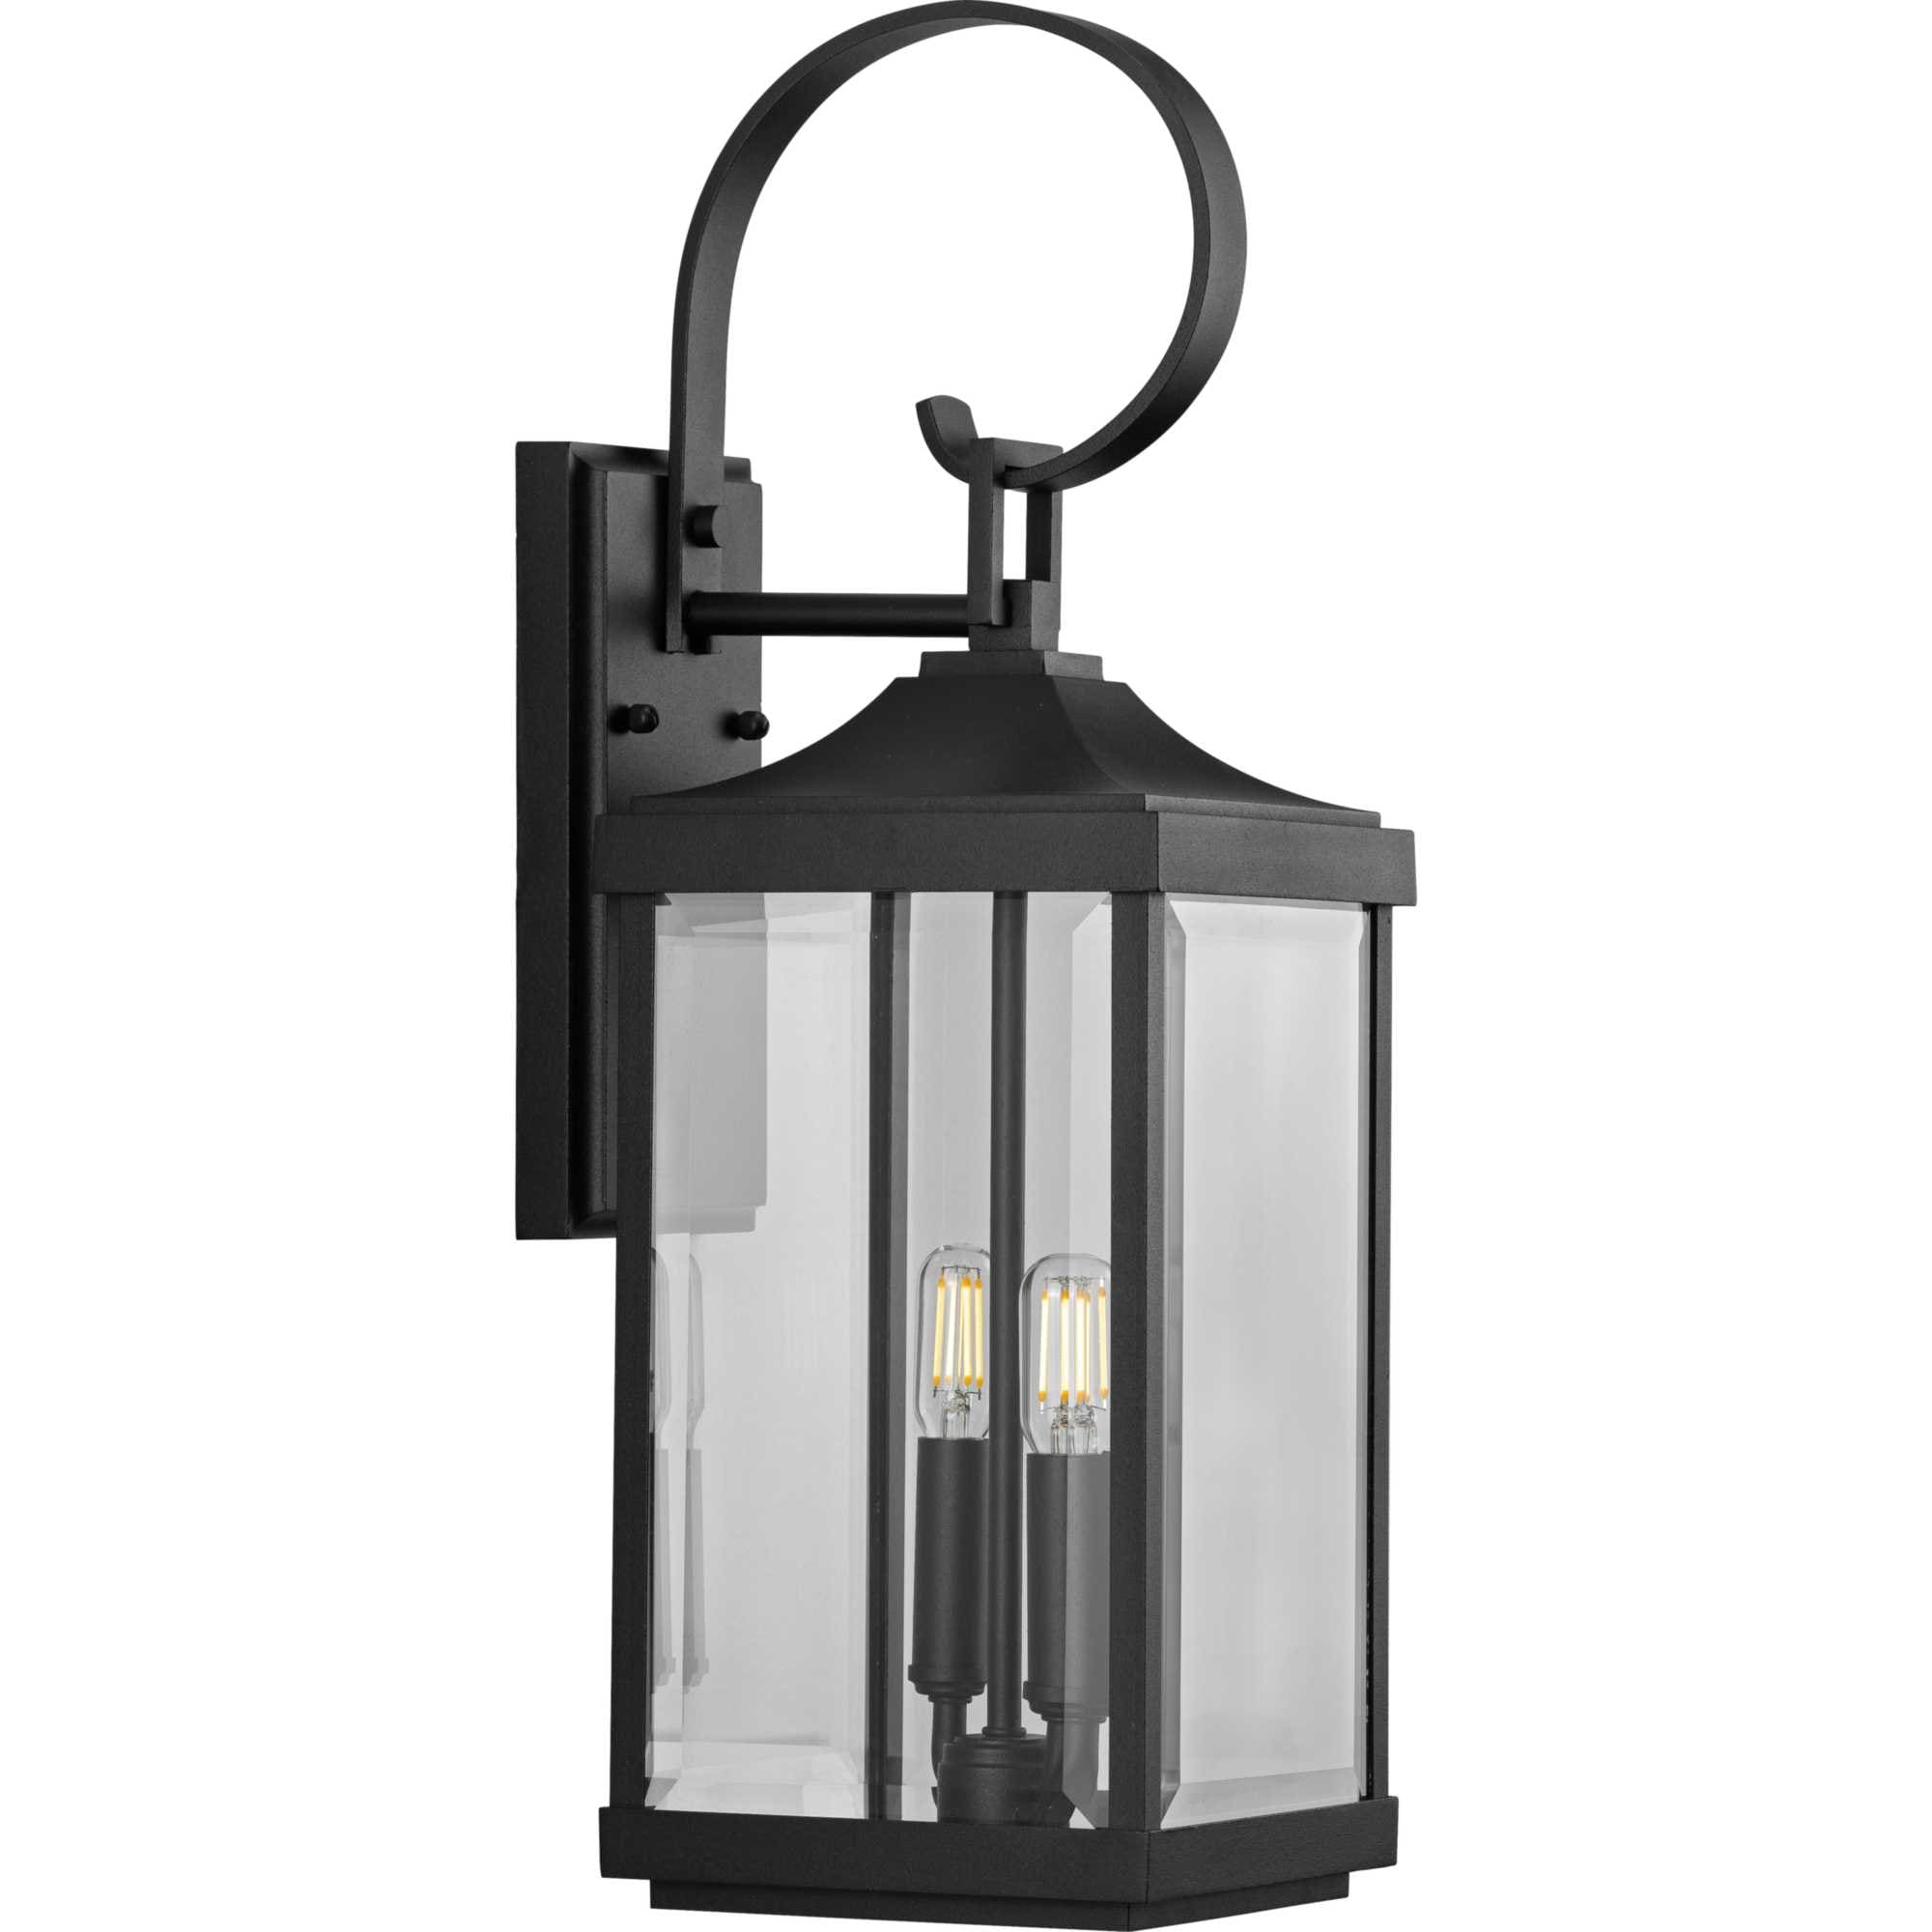 Large Traditional Style Black Outdoor Security IP44 Rated Upward Facing Wall Lantern Light with Beveled Glass Panels LED Compatible